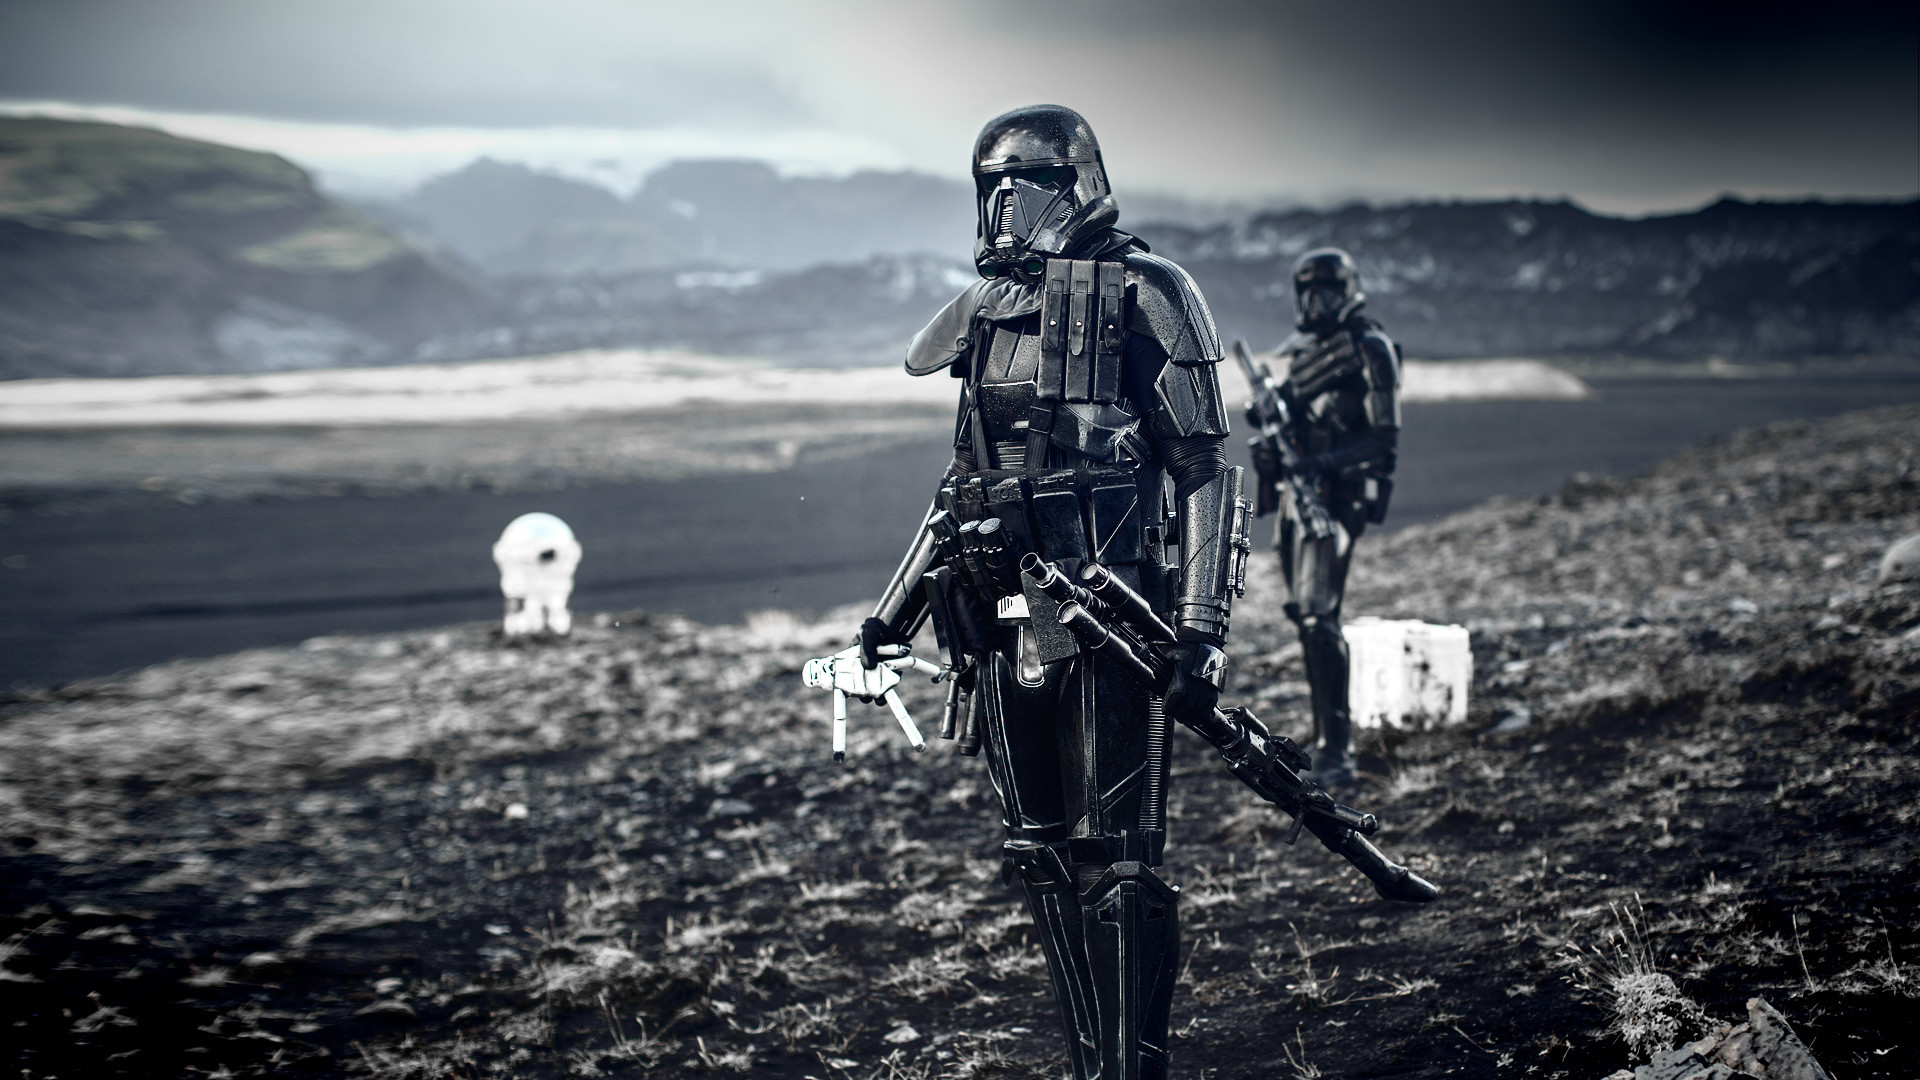 1920x1080 Star Wars: Rogue One - Dual Monitor Wallpaper | Top reddit wallpapers |  Pinterest | Rogues, Monitor and Wallpaper